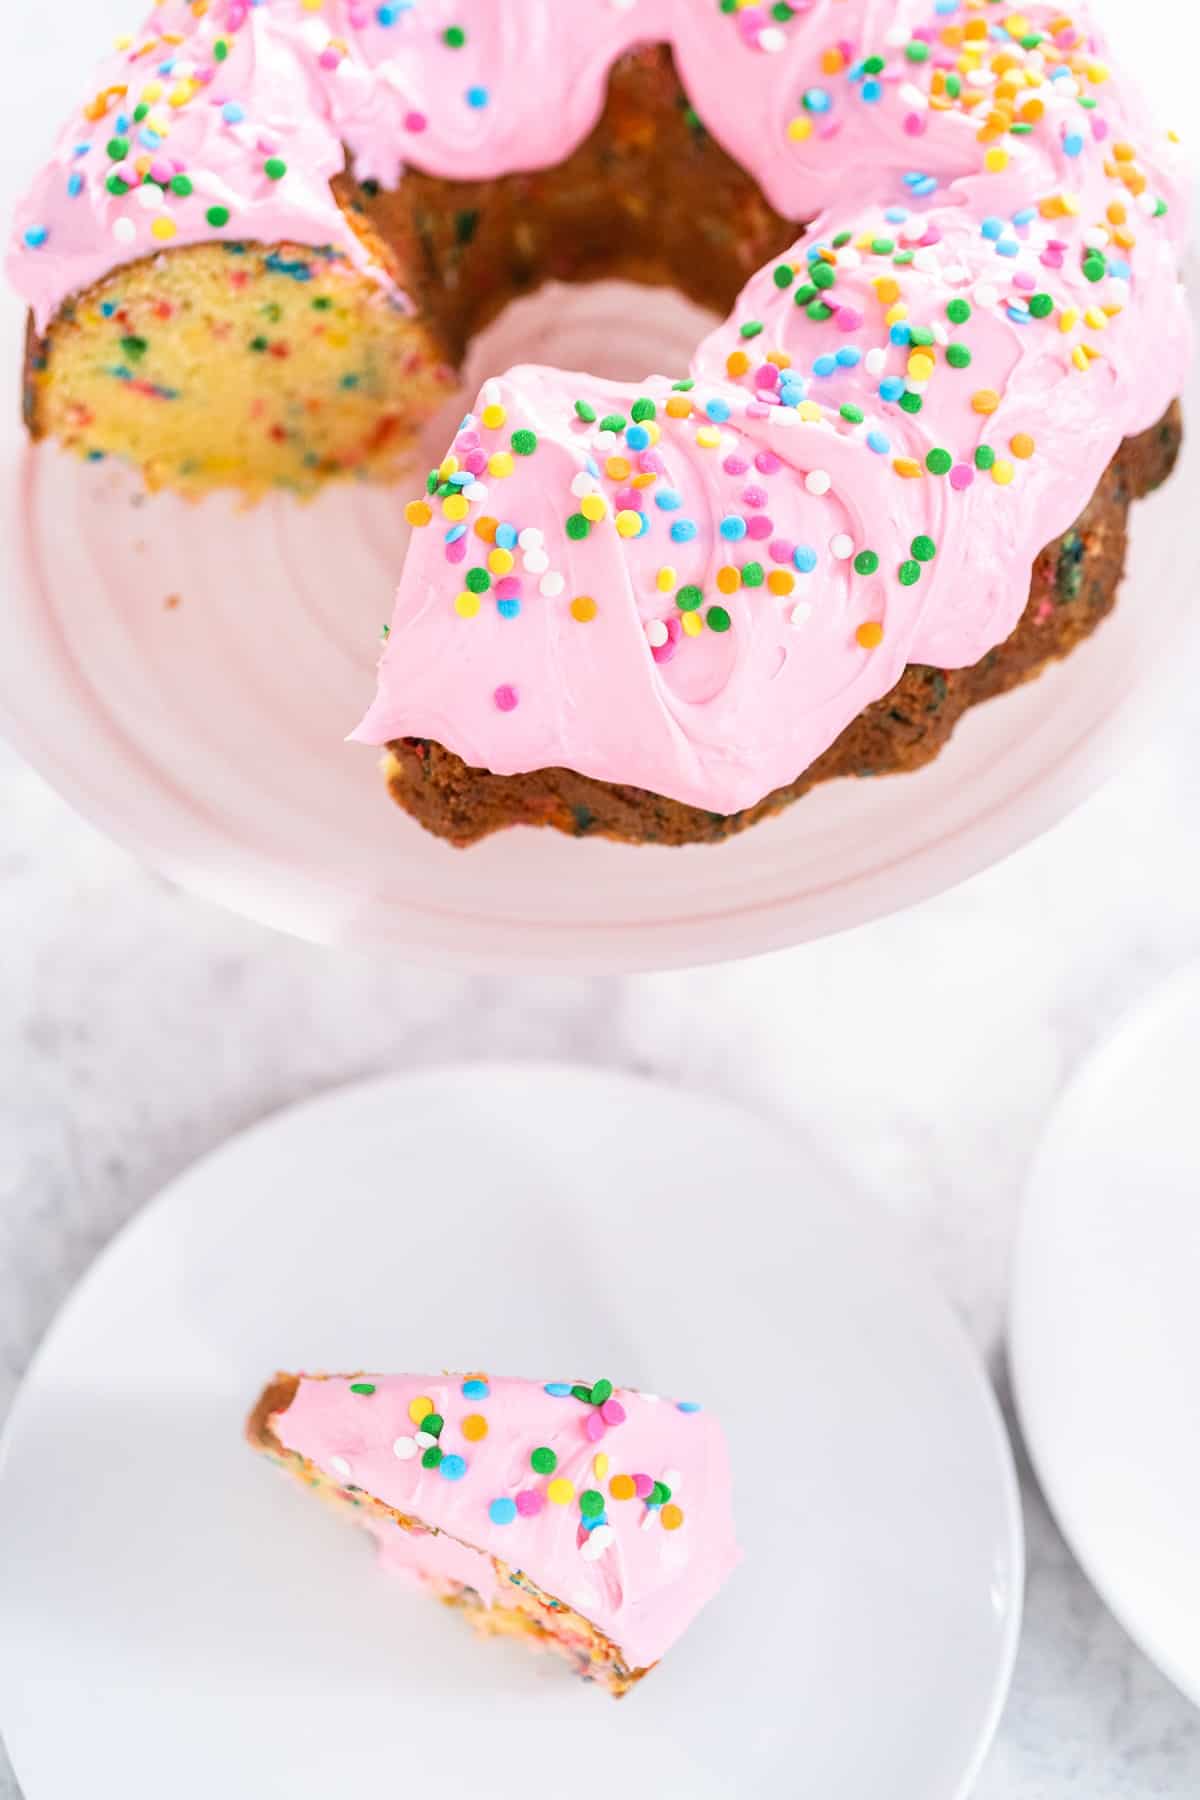 Bundt cake with pink frosting and sprinkles.